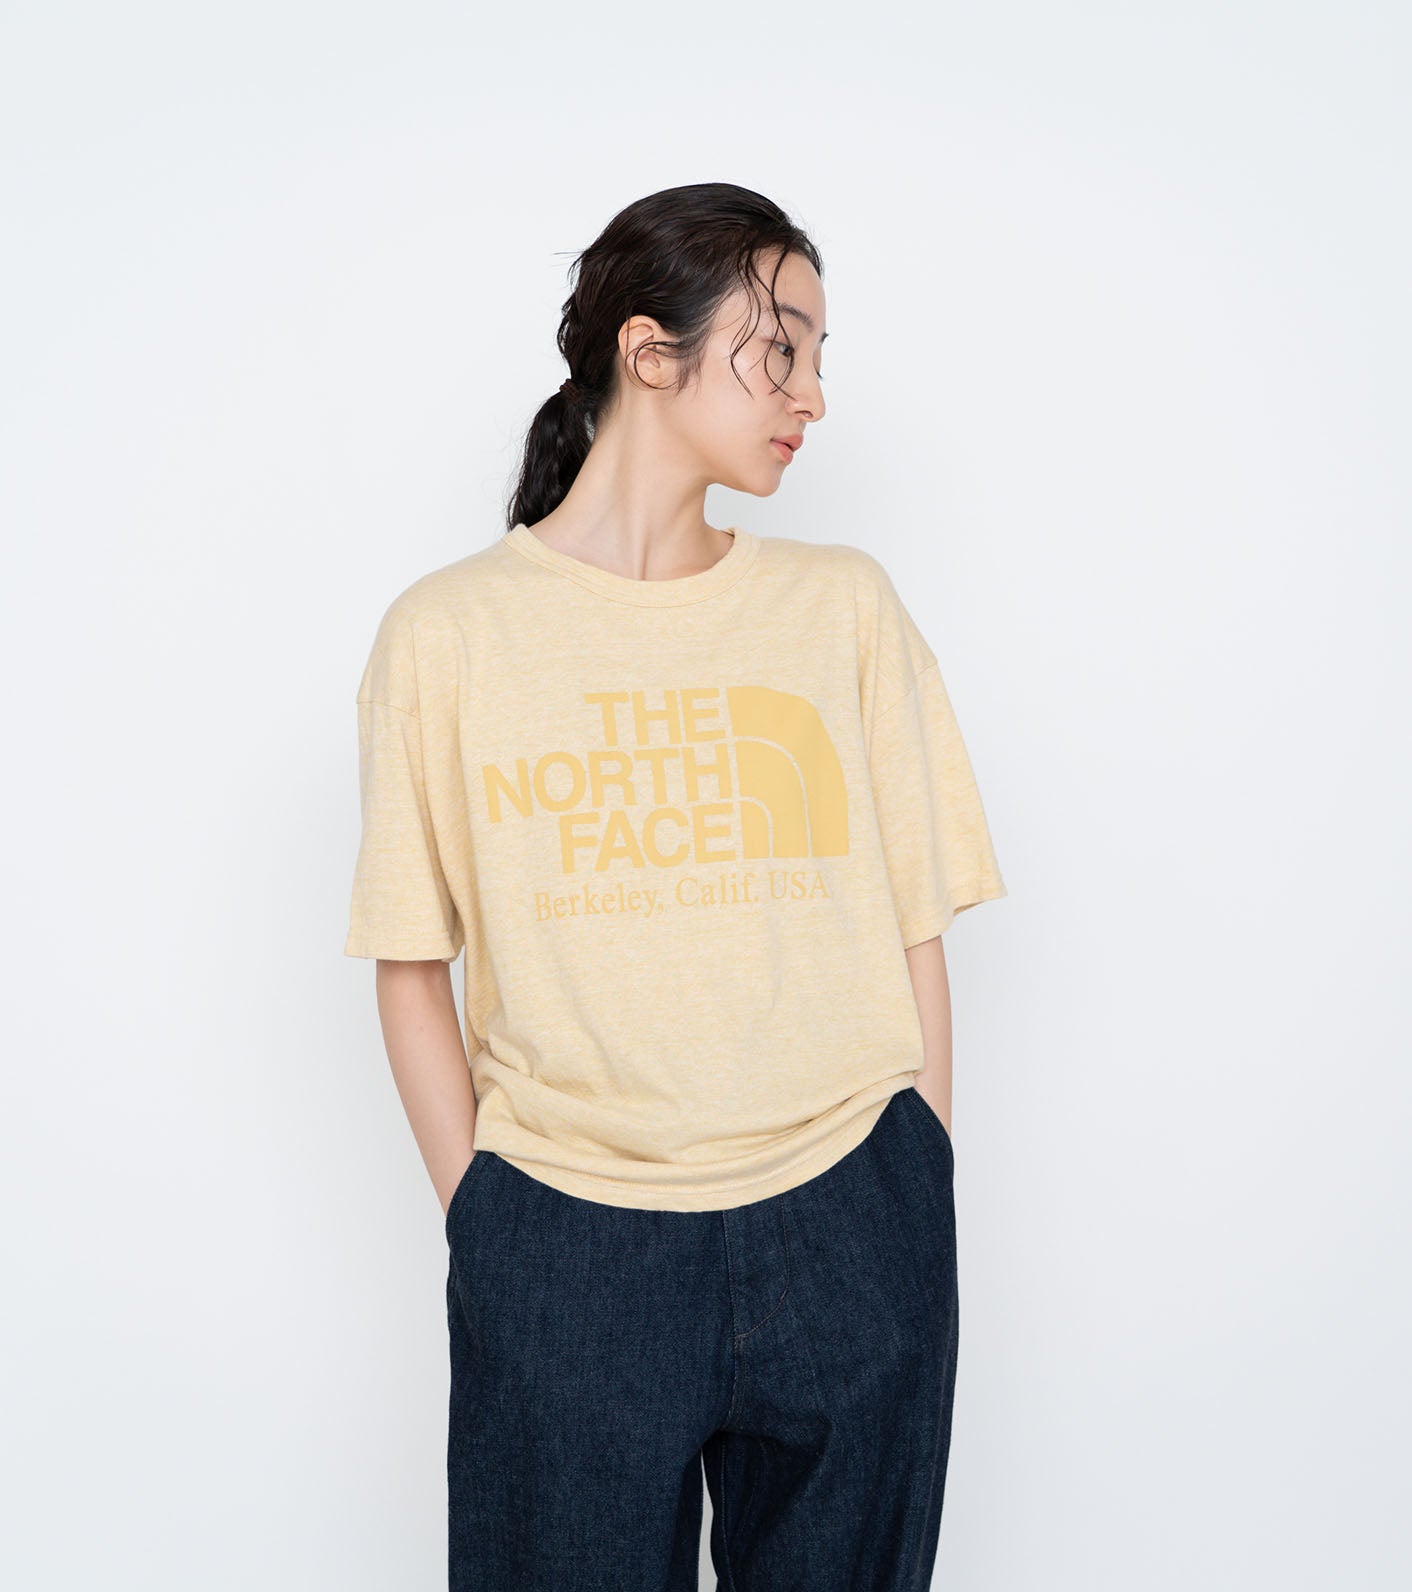 THE NORTH FACE PURPLE LABEL Cotton Rayon Field Graphic Tee